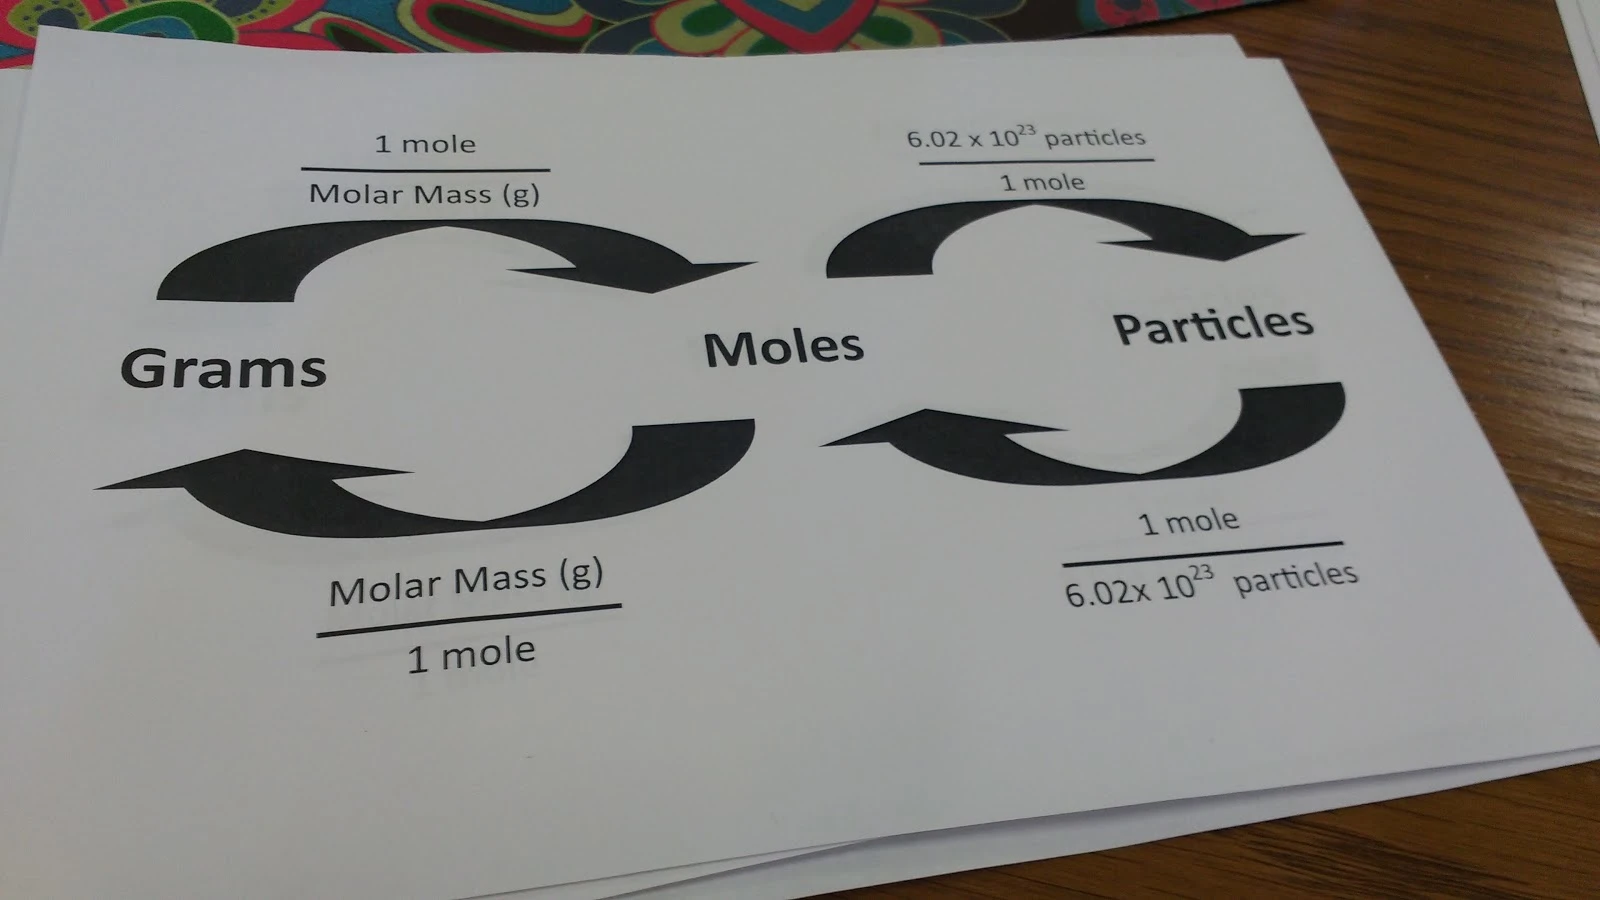 mole map to convert grams, moles, and particles. 